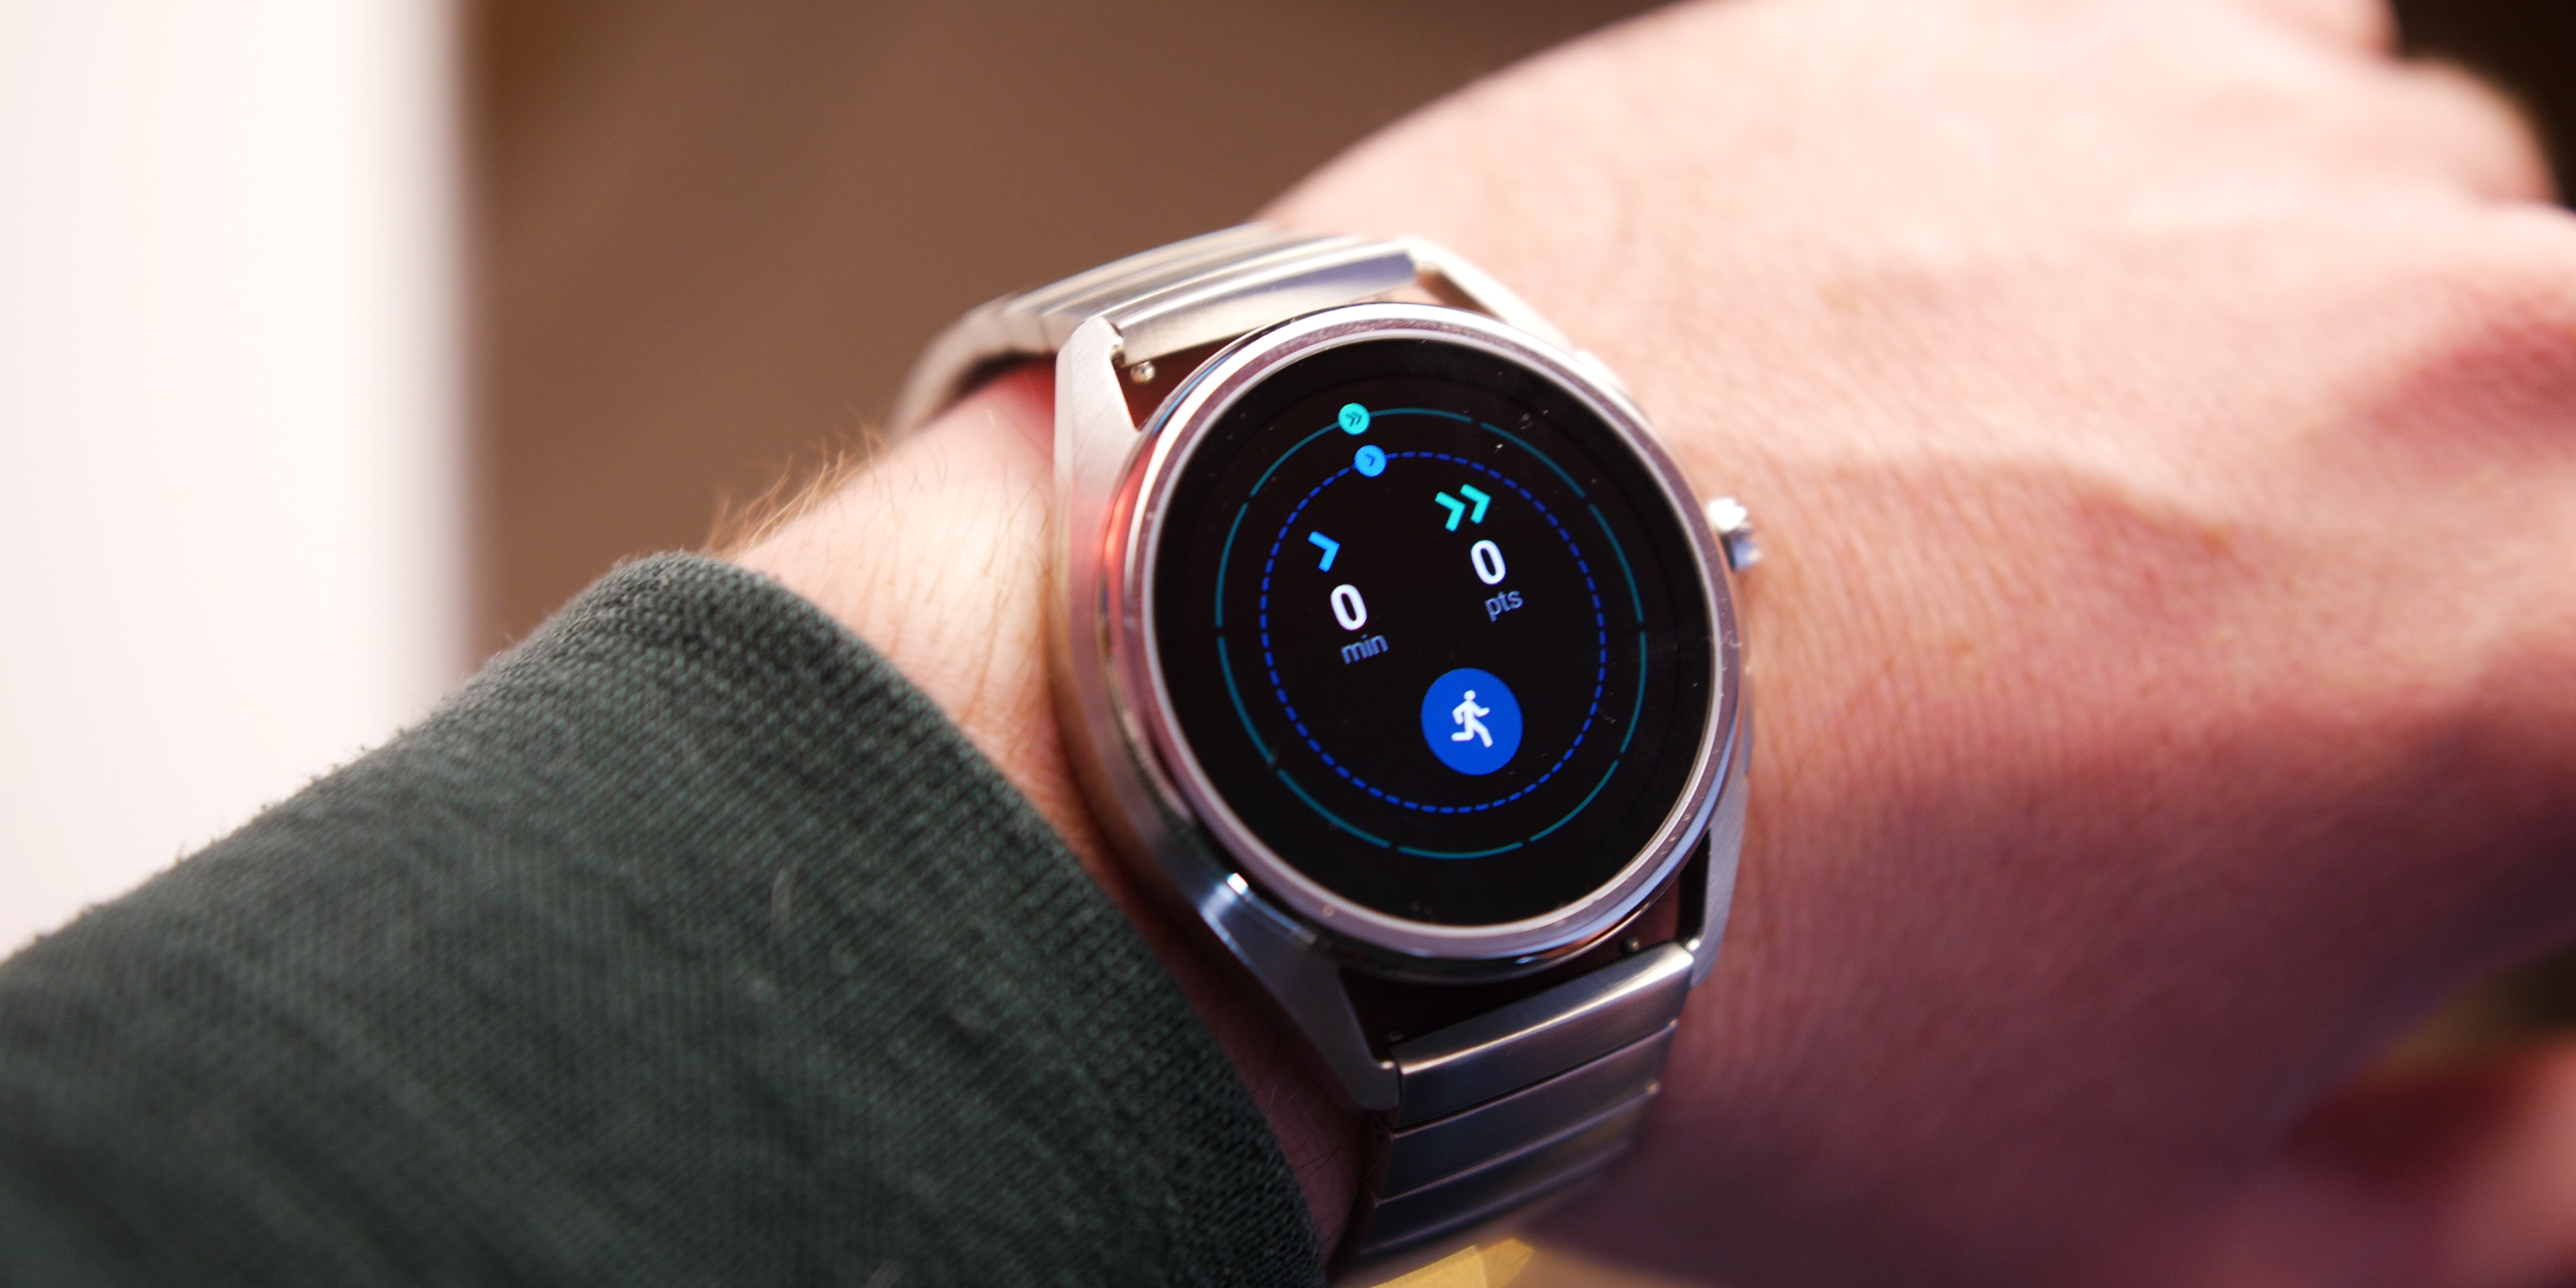 Emporio Armani Connected review: Wear OS but high-end - 9to5Google